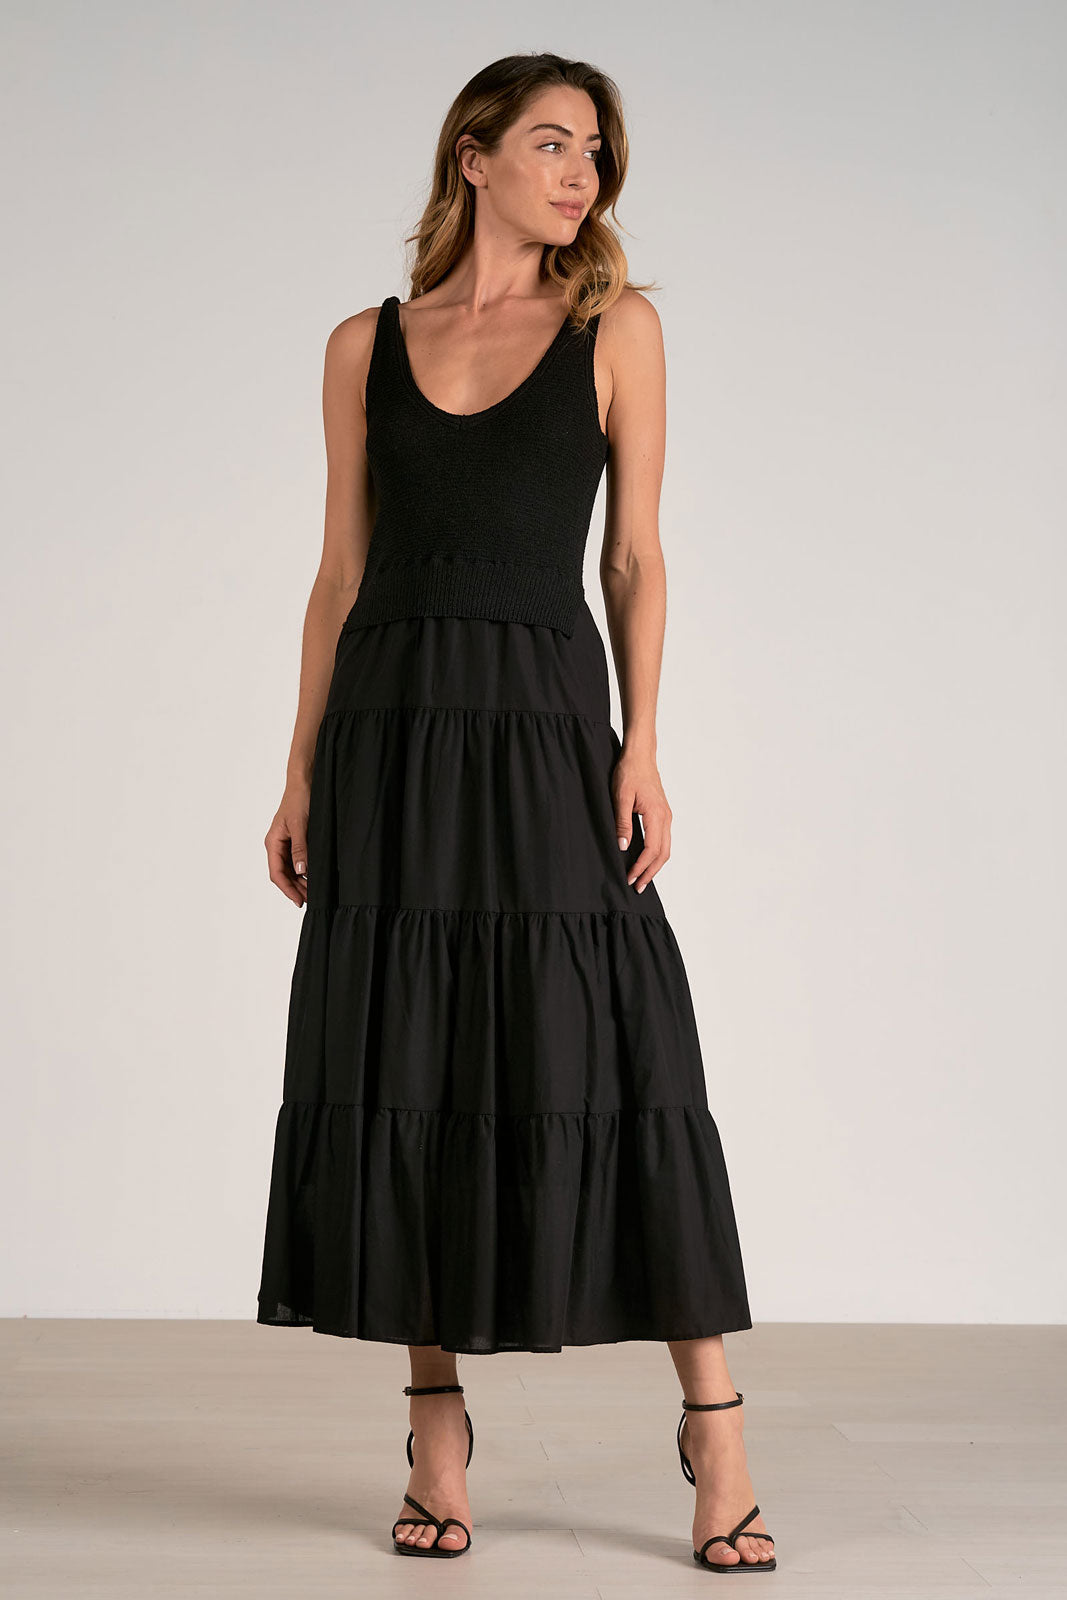 Aries Dress in black - front view